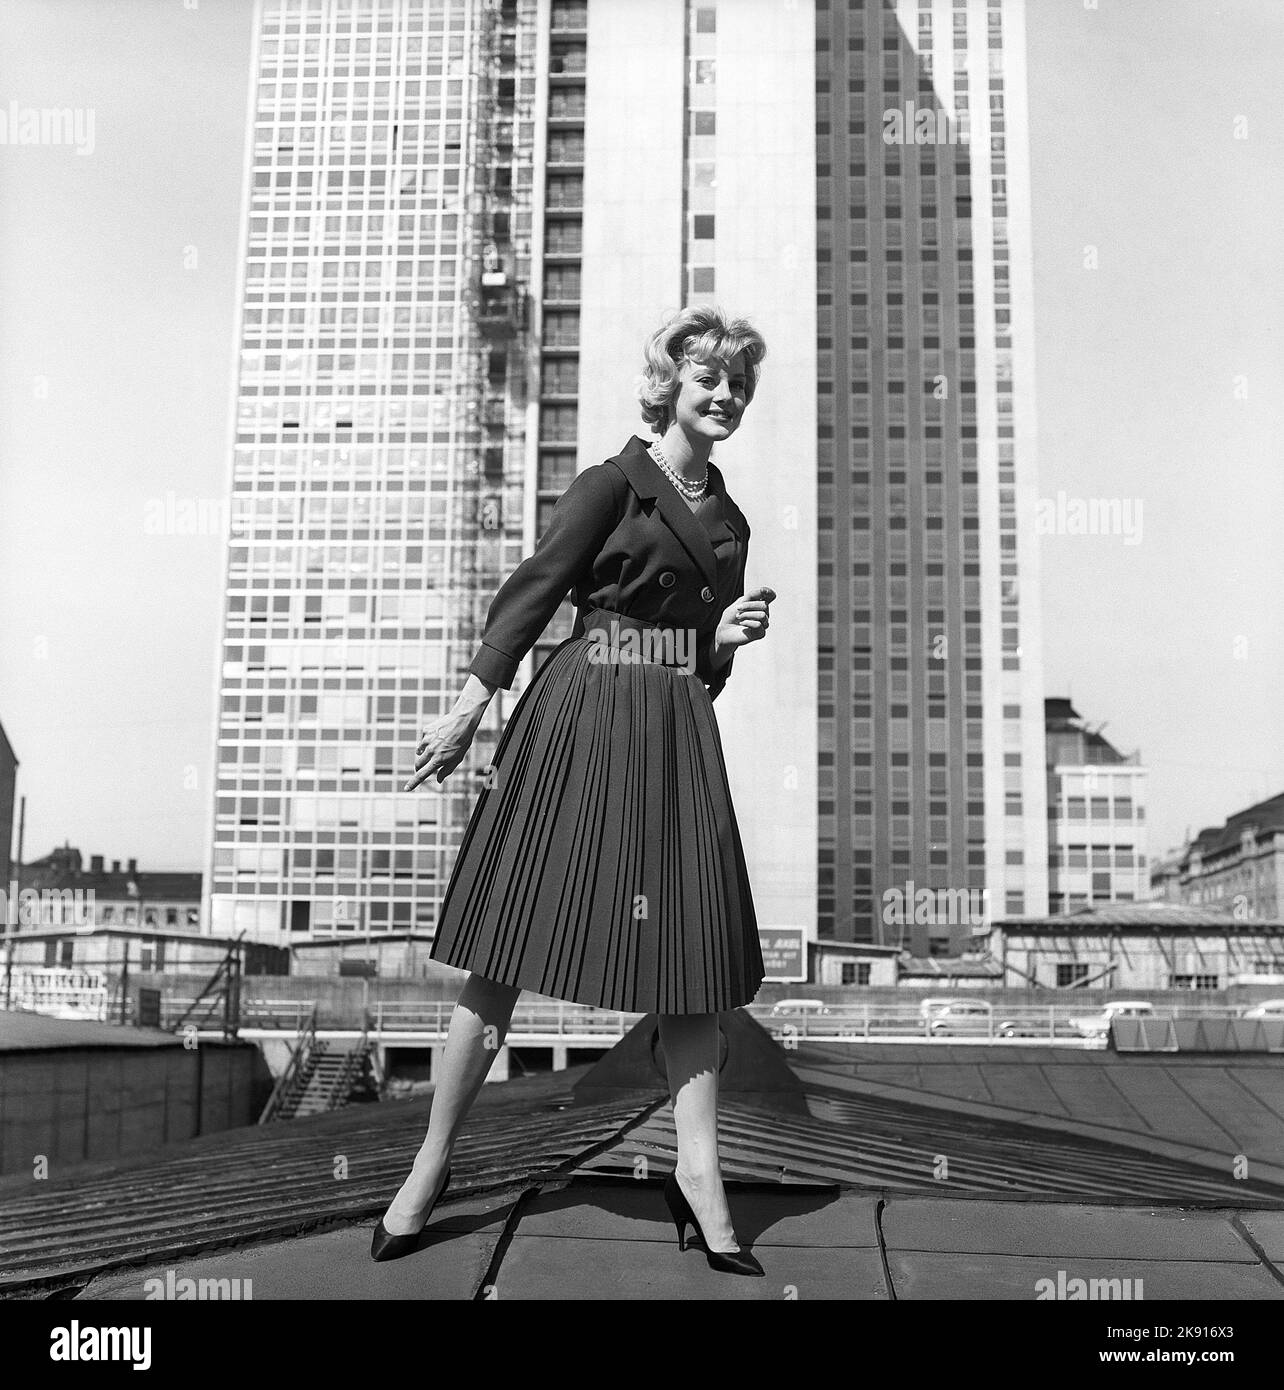 In the 1950s. A woman modelling a 1950s outfit with a jacket and skirt in matching dark. In the background the newly finished skyscraper housing the swedish tax offices. Sweden 1959 Kristoffersson ref CH21 Stock Photo